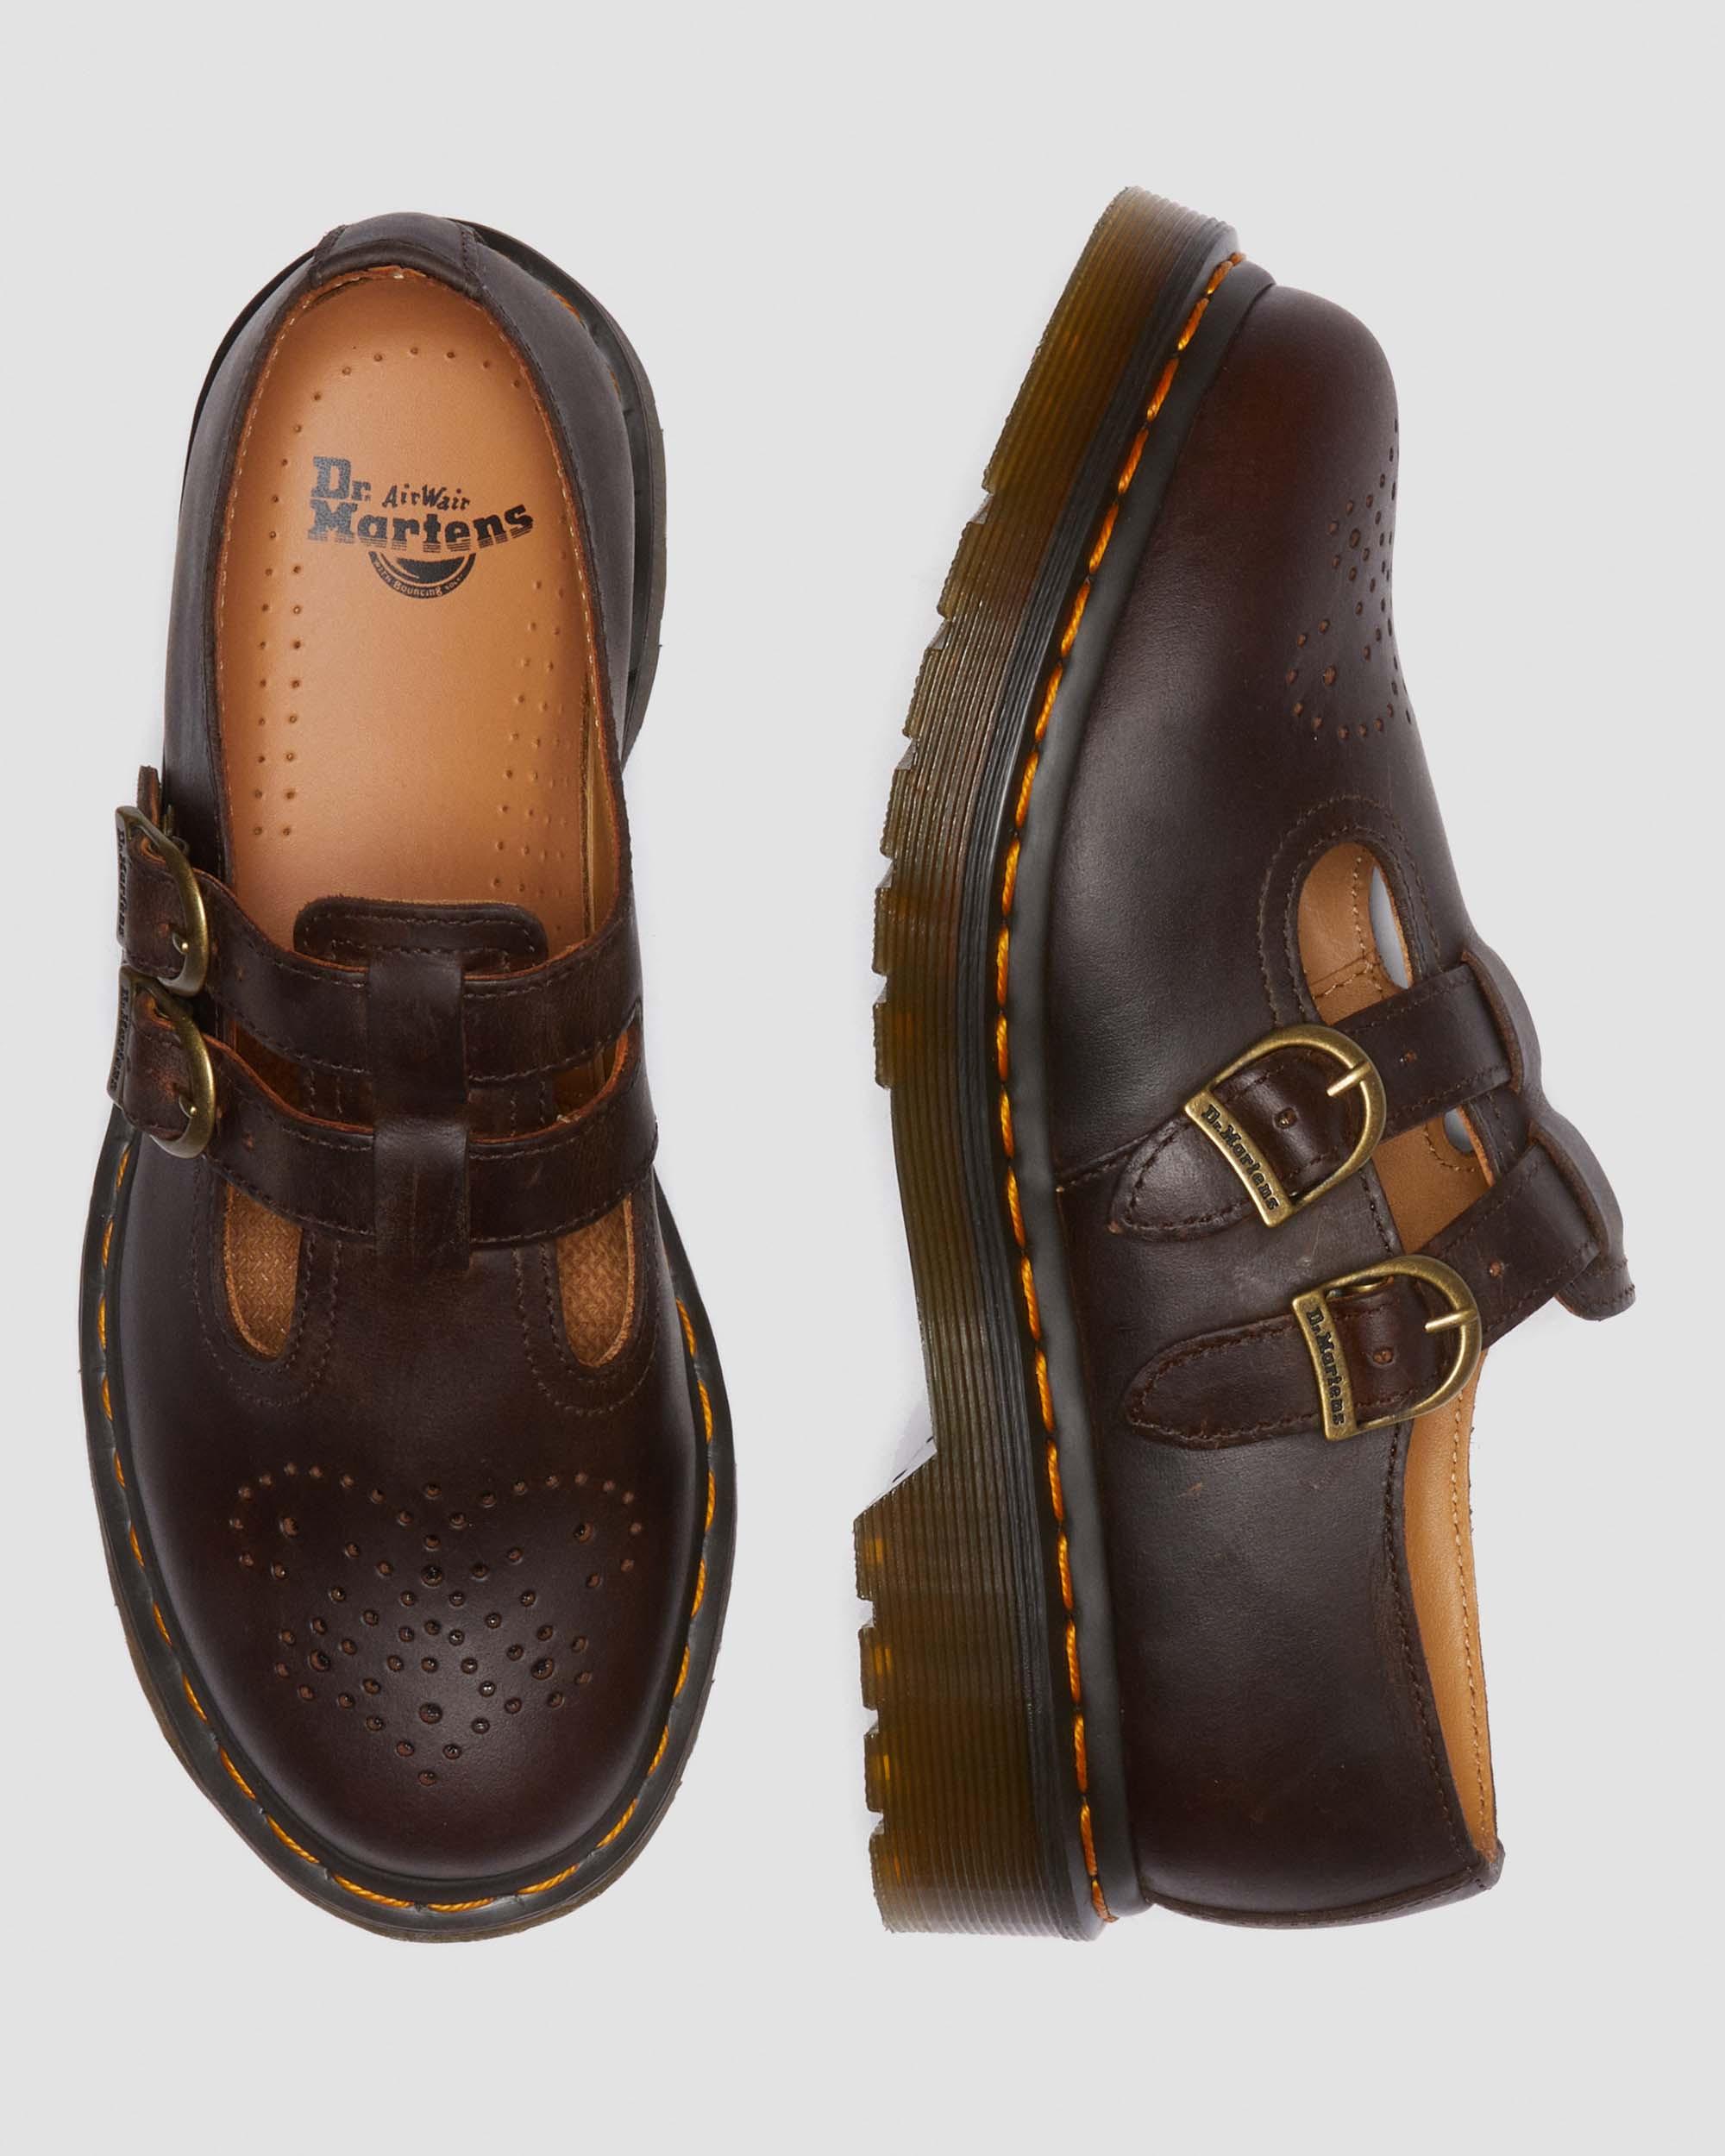 8065 Crazy Horse Leather Mary Jane Shoes in Dark Brown